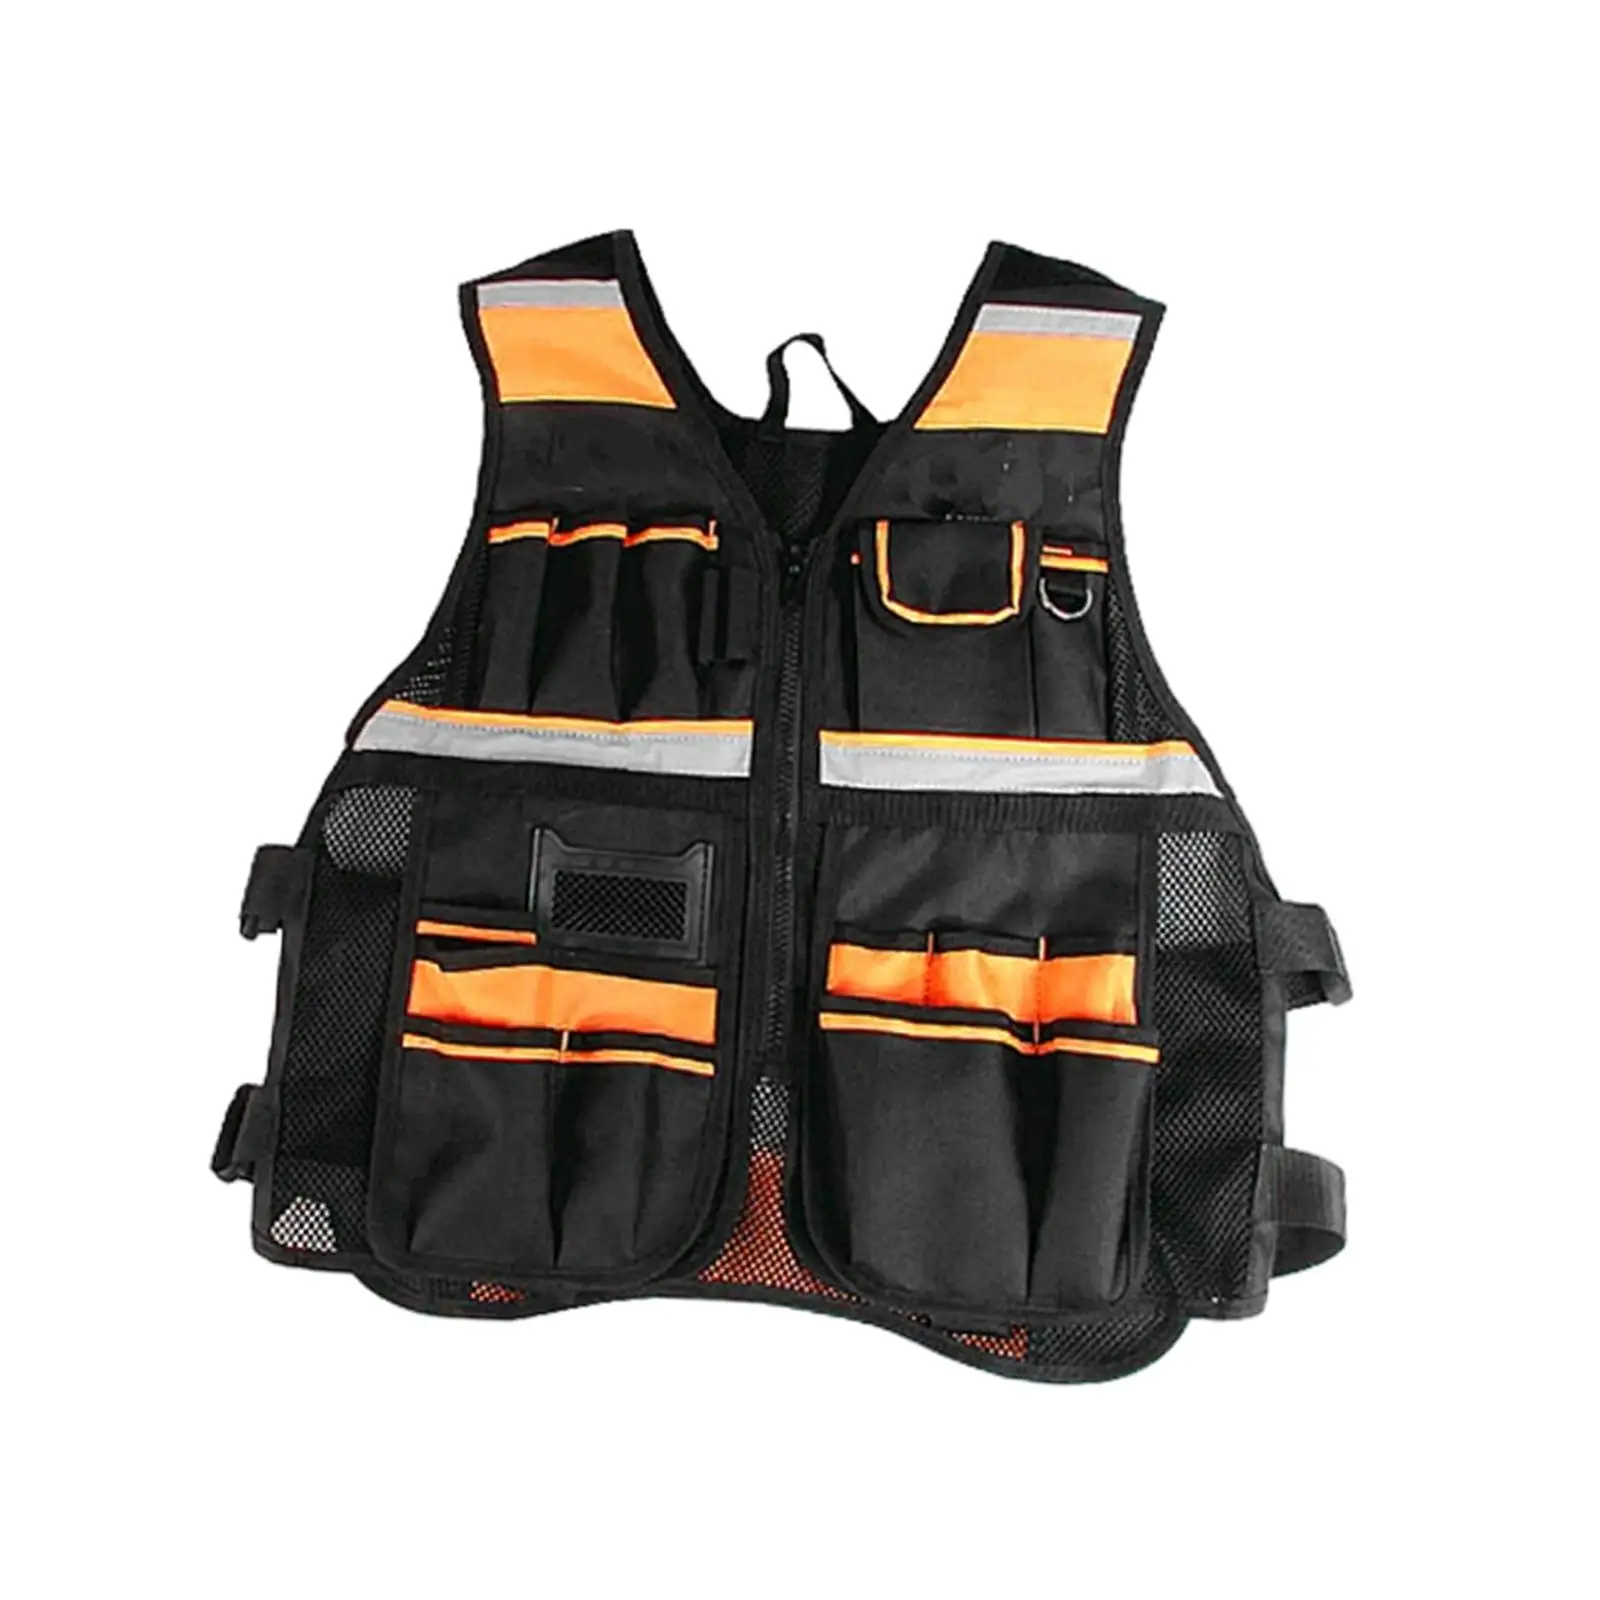 Safety Tool Vest Reflective Electrician Carpenters Work Vest for Men with Pockets Workwear for Industrial Household Construction